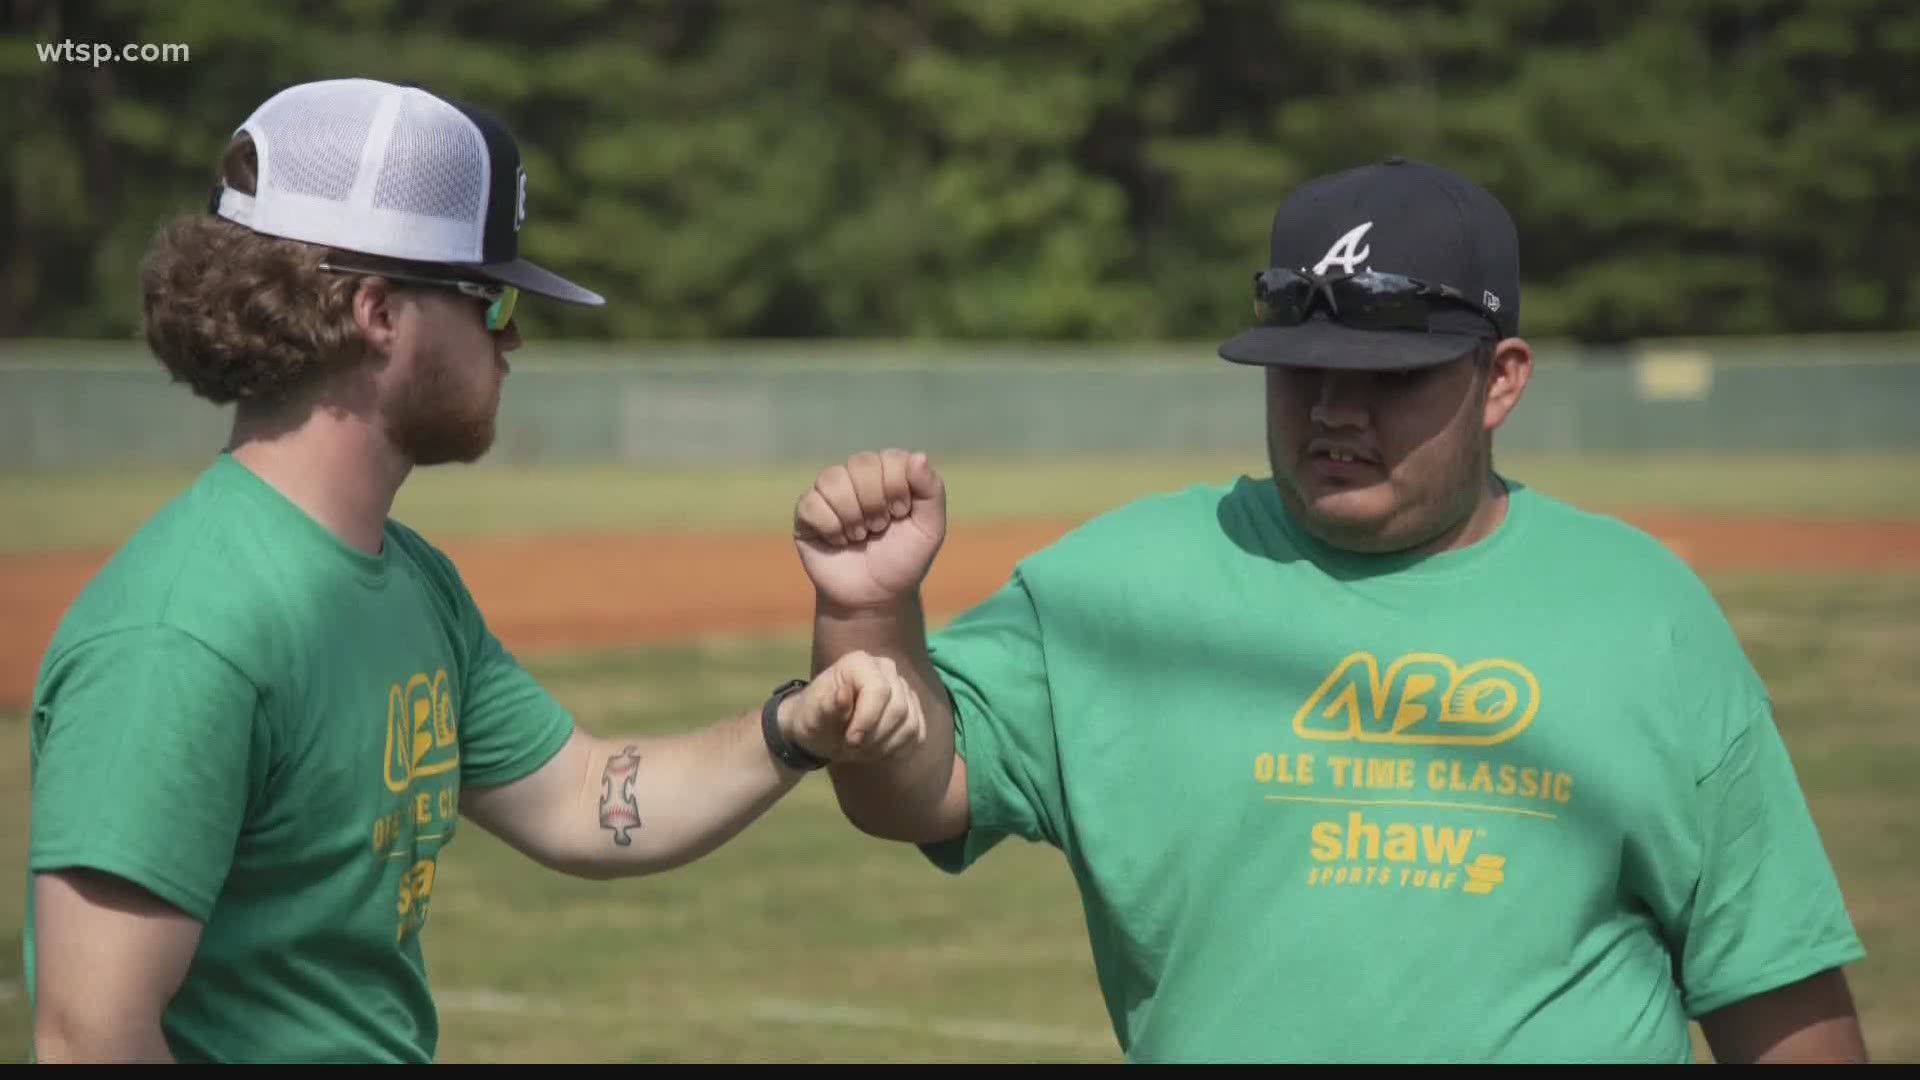 Taylor Duncan's non-profit offers people with autism the chance to play baseball in a traditional team setting.